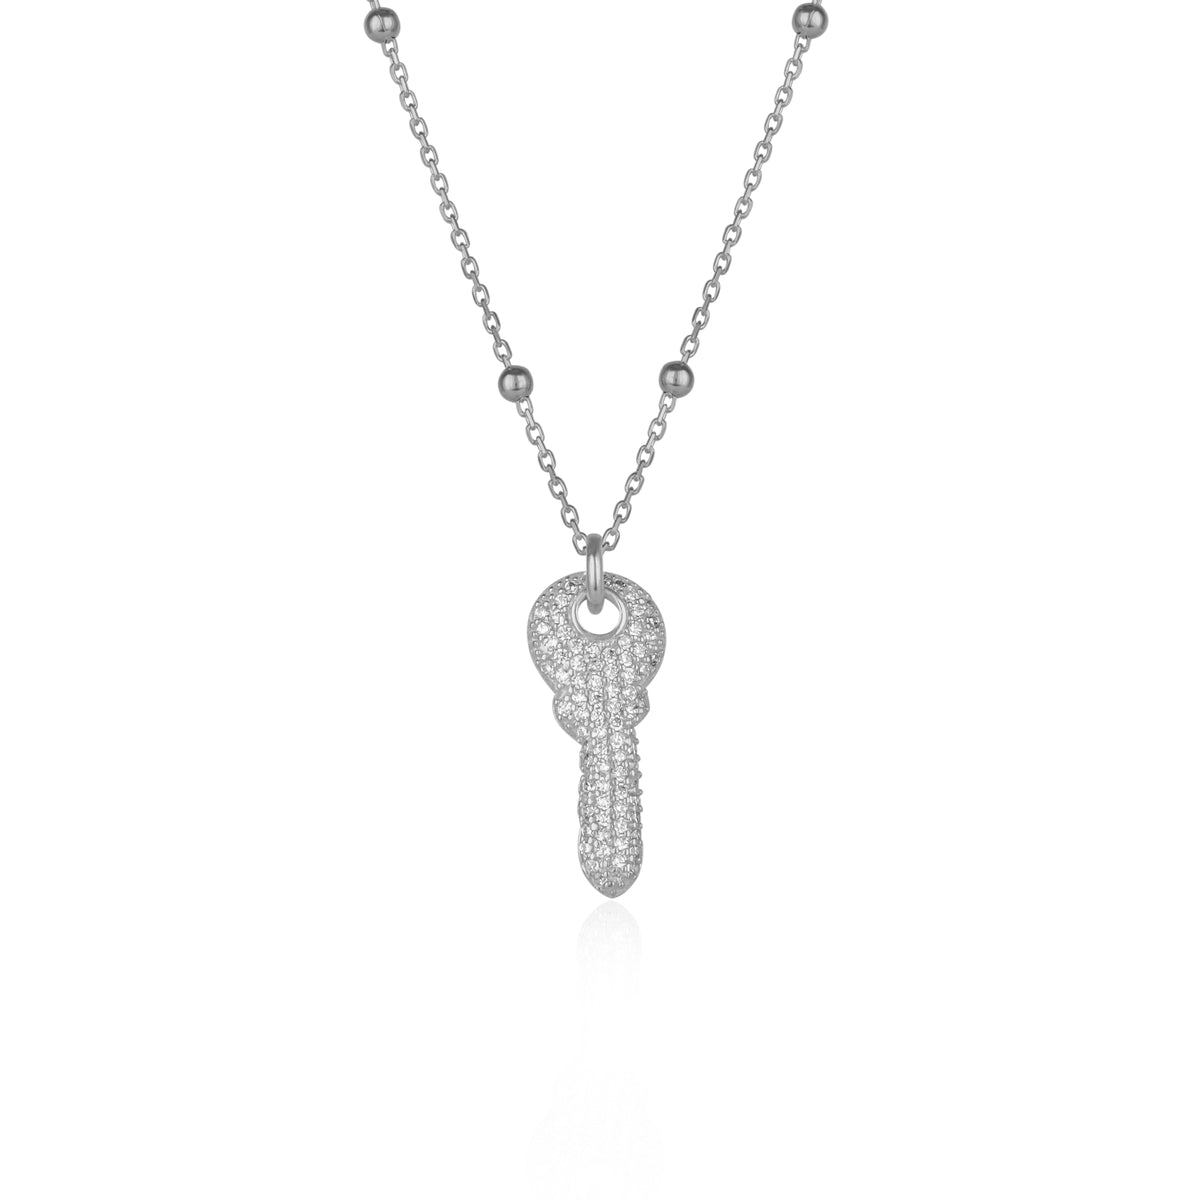 Key Pendant Necklace With Beaded Chain Sterling Silver